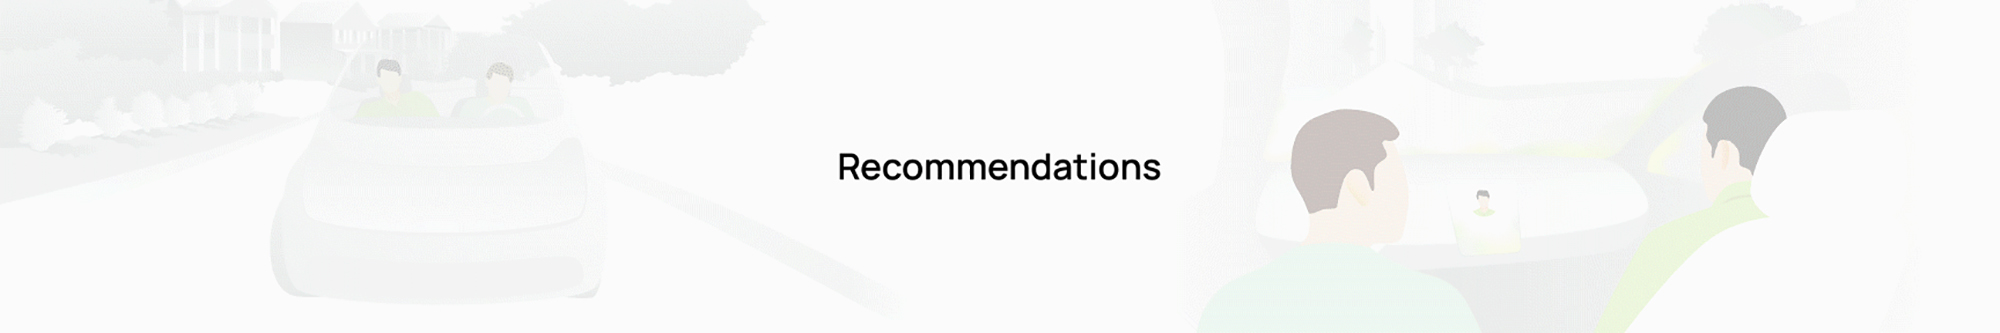 Recommendations animation